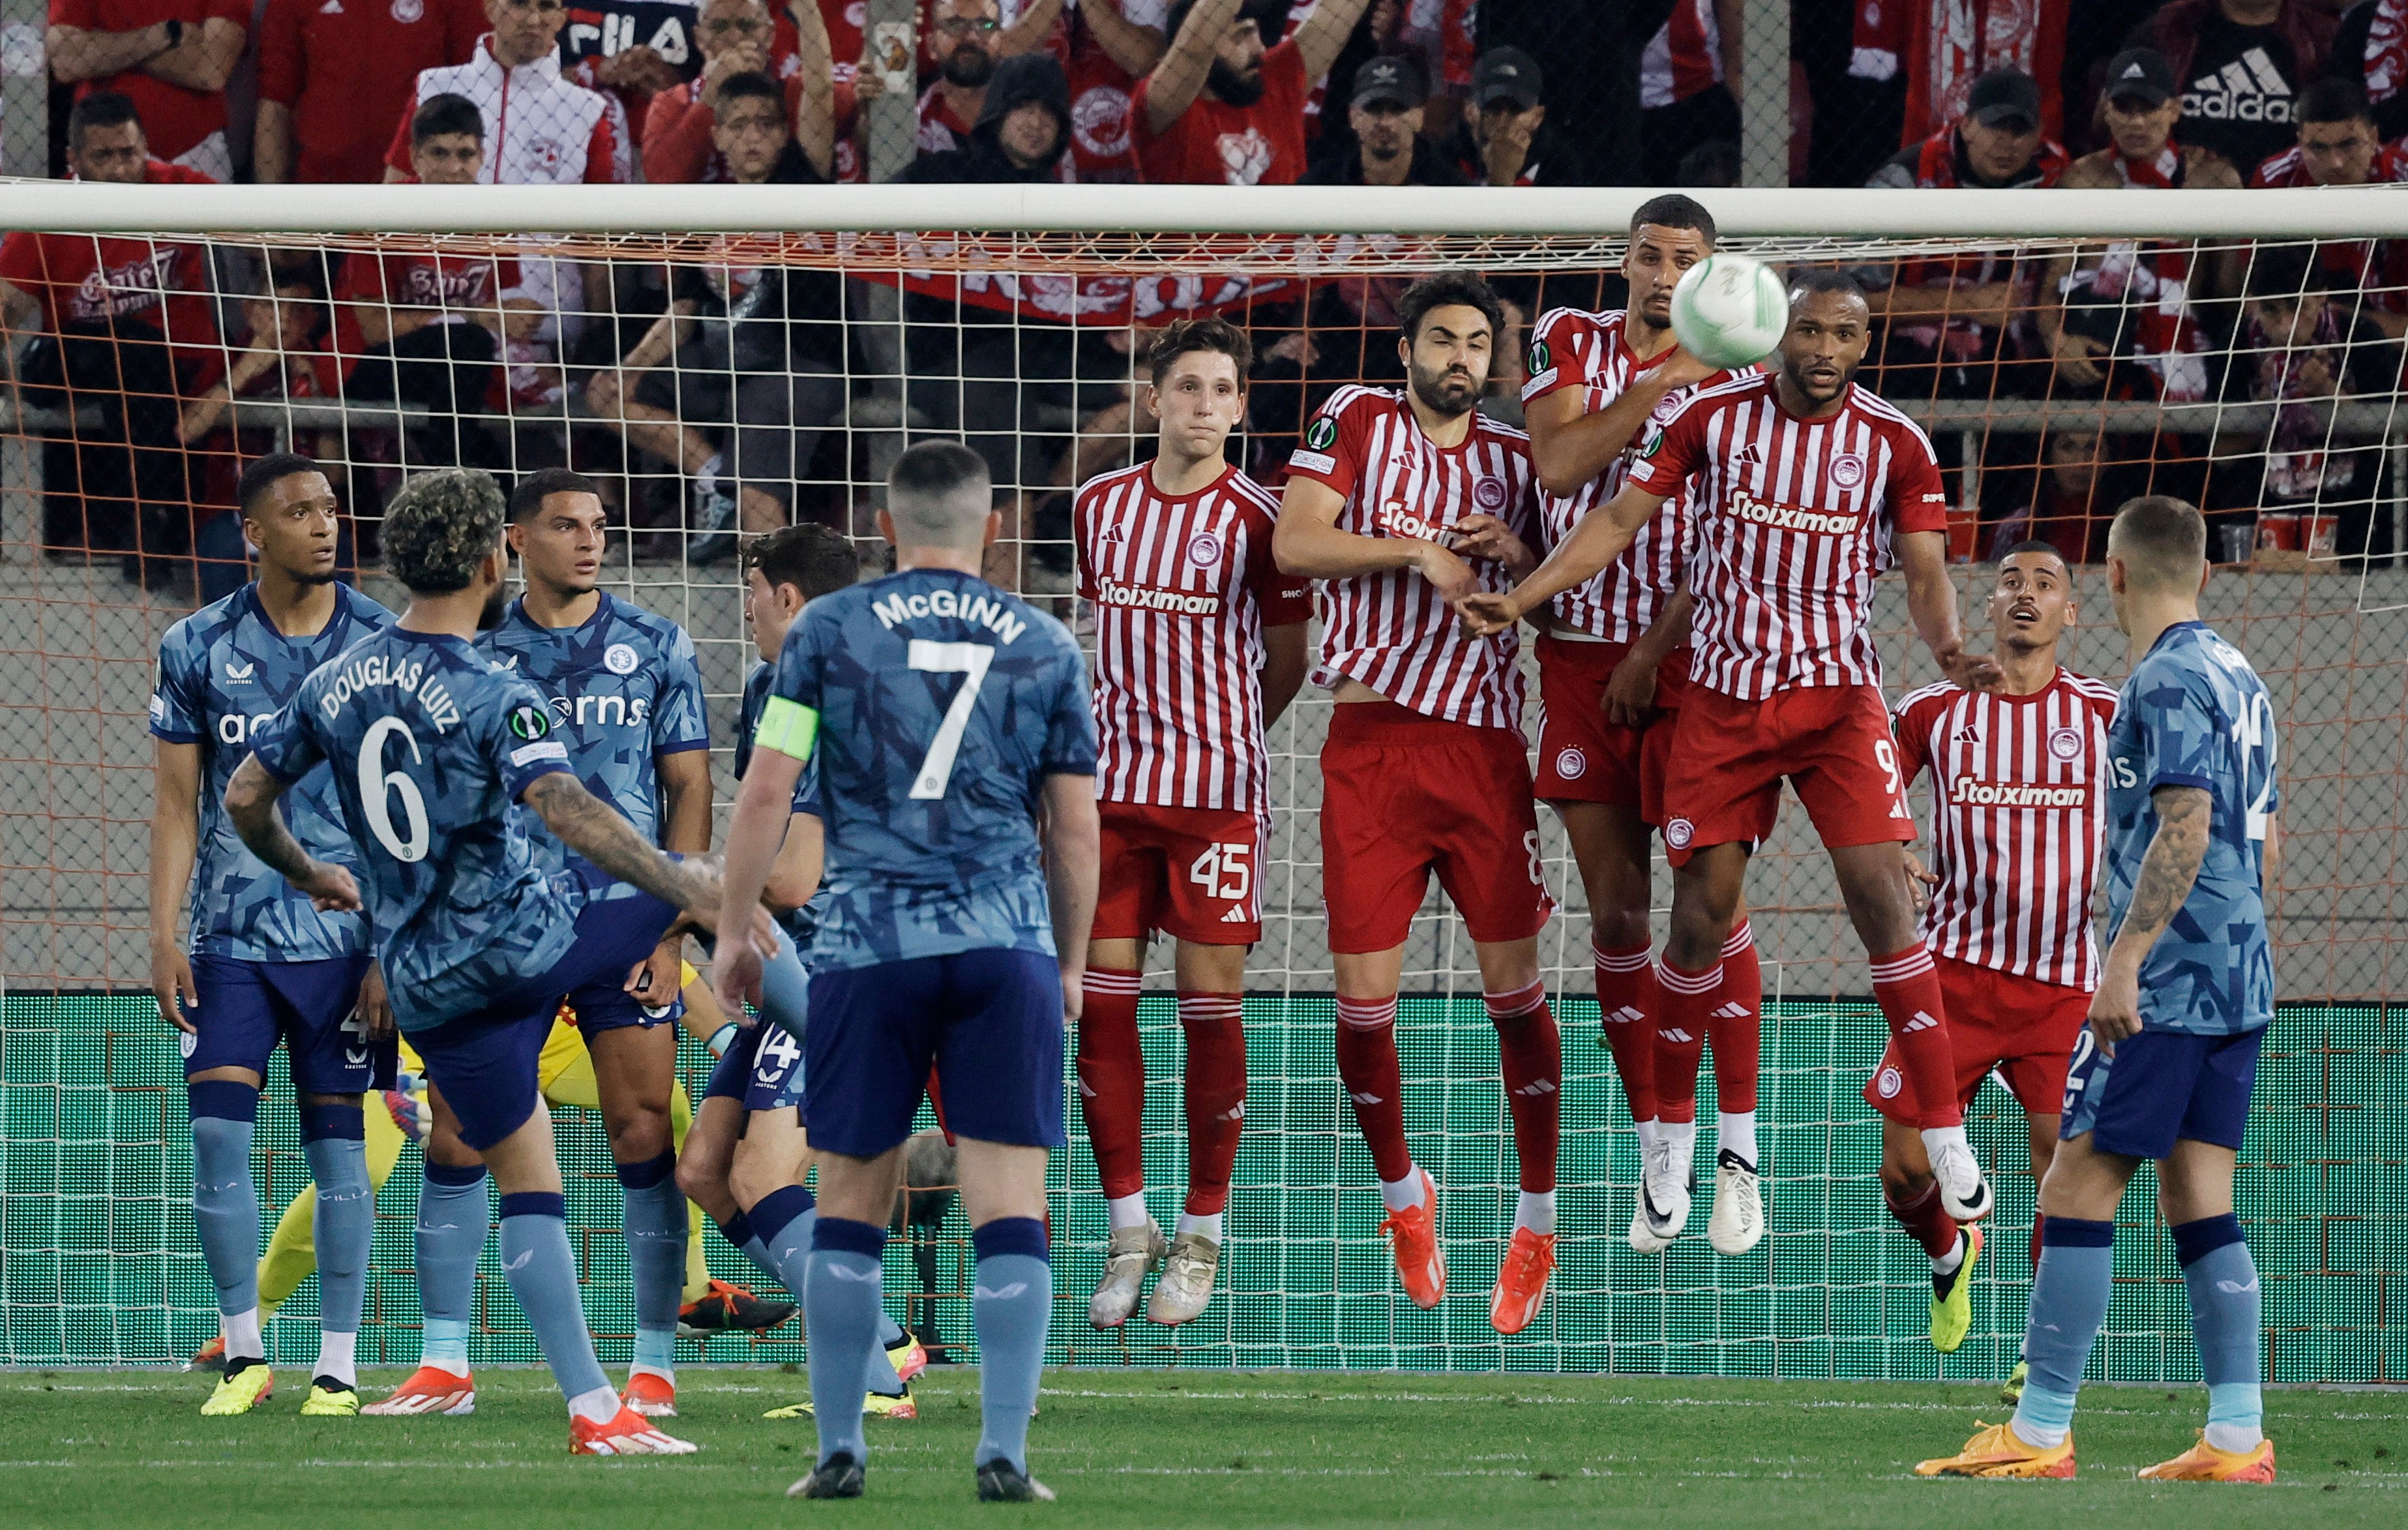 olympiacos v aston villa live: europa conference league latest score and goal updates as el kaabi strikes again